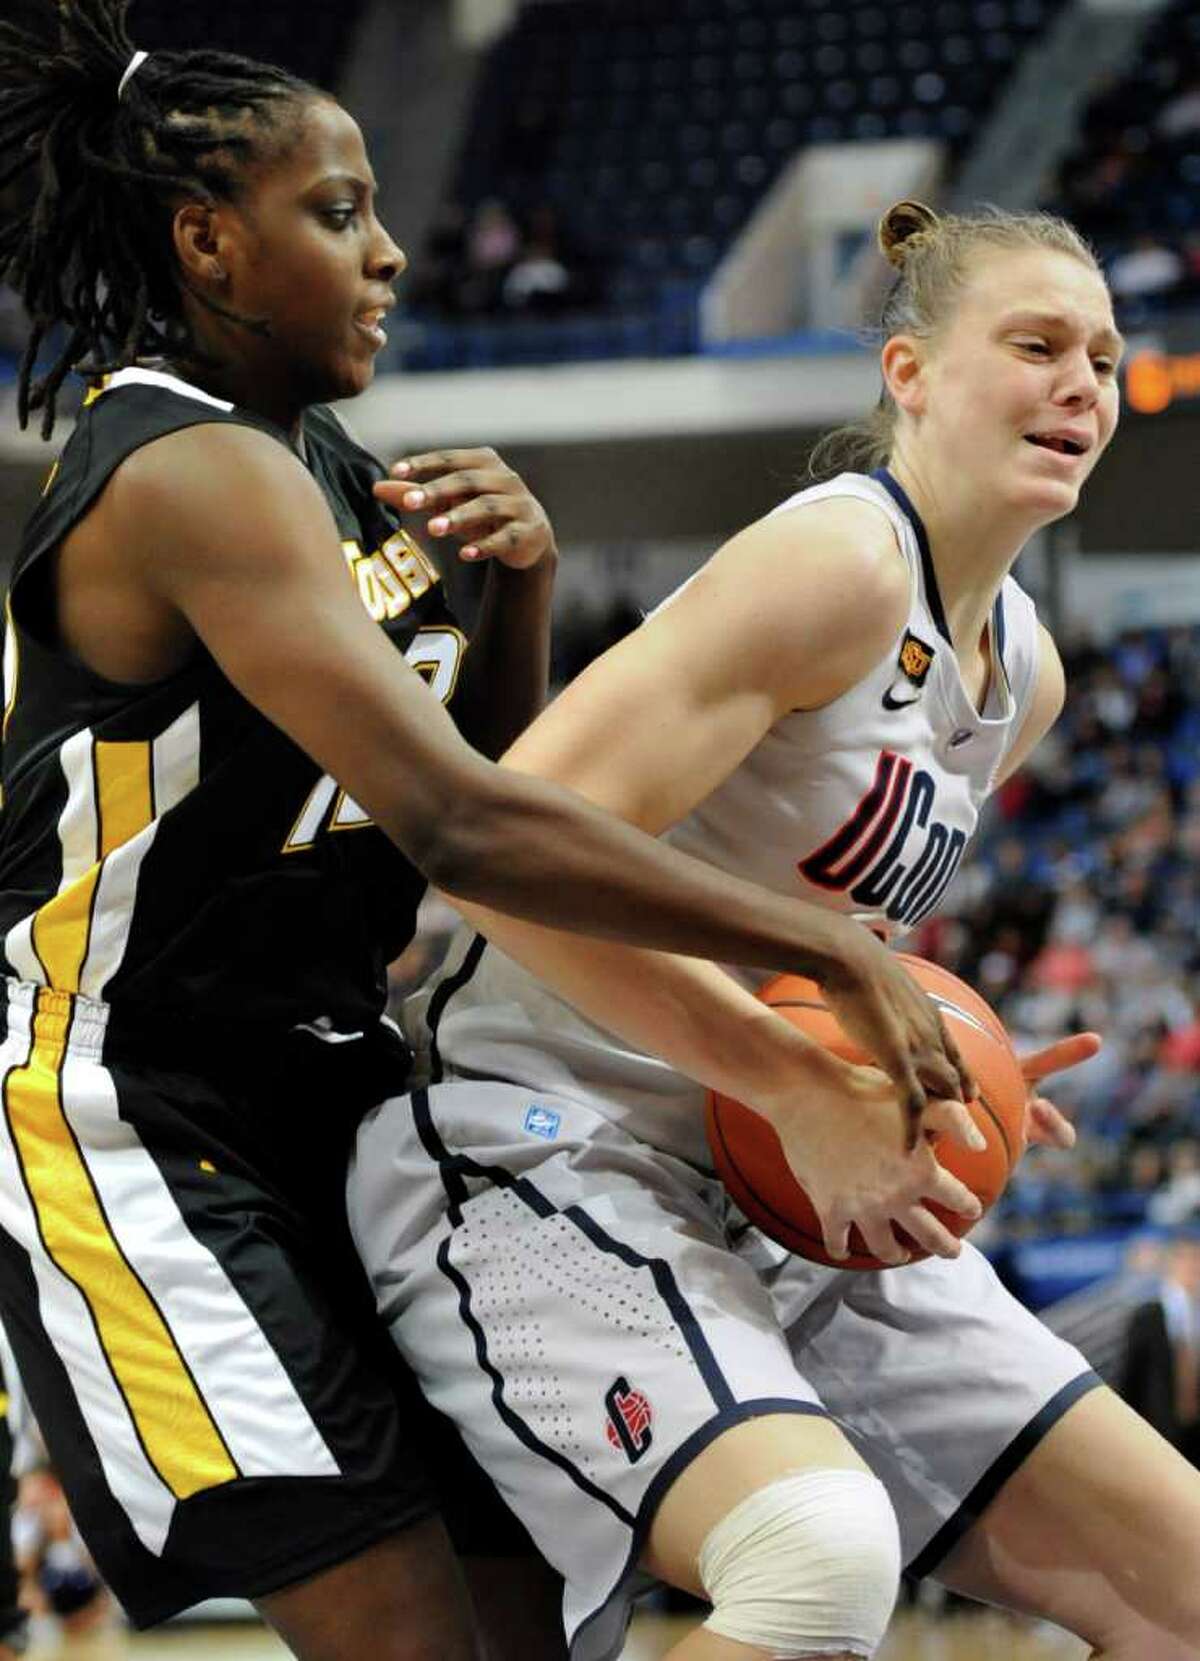 Connecticut's Heather Buck, right, is guarded by Towson's Krystin Fields, left, in the first half of an NCAA college basketball game in Hartford, Conn., Wednesday, Nov. 30, 2011. (AP Photo/Jessica Hill)